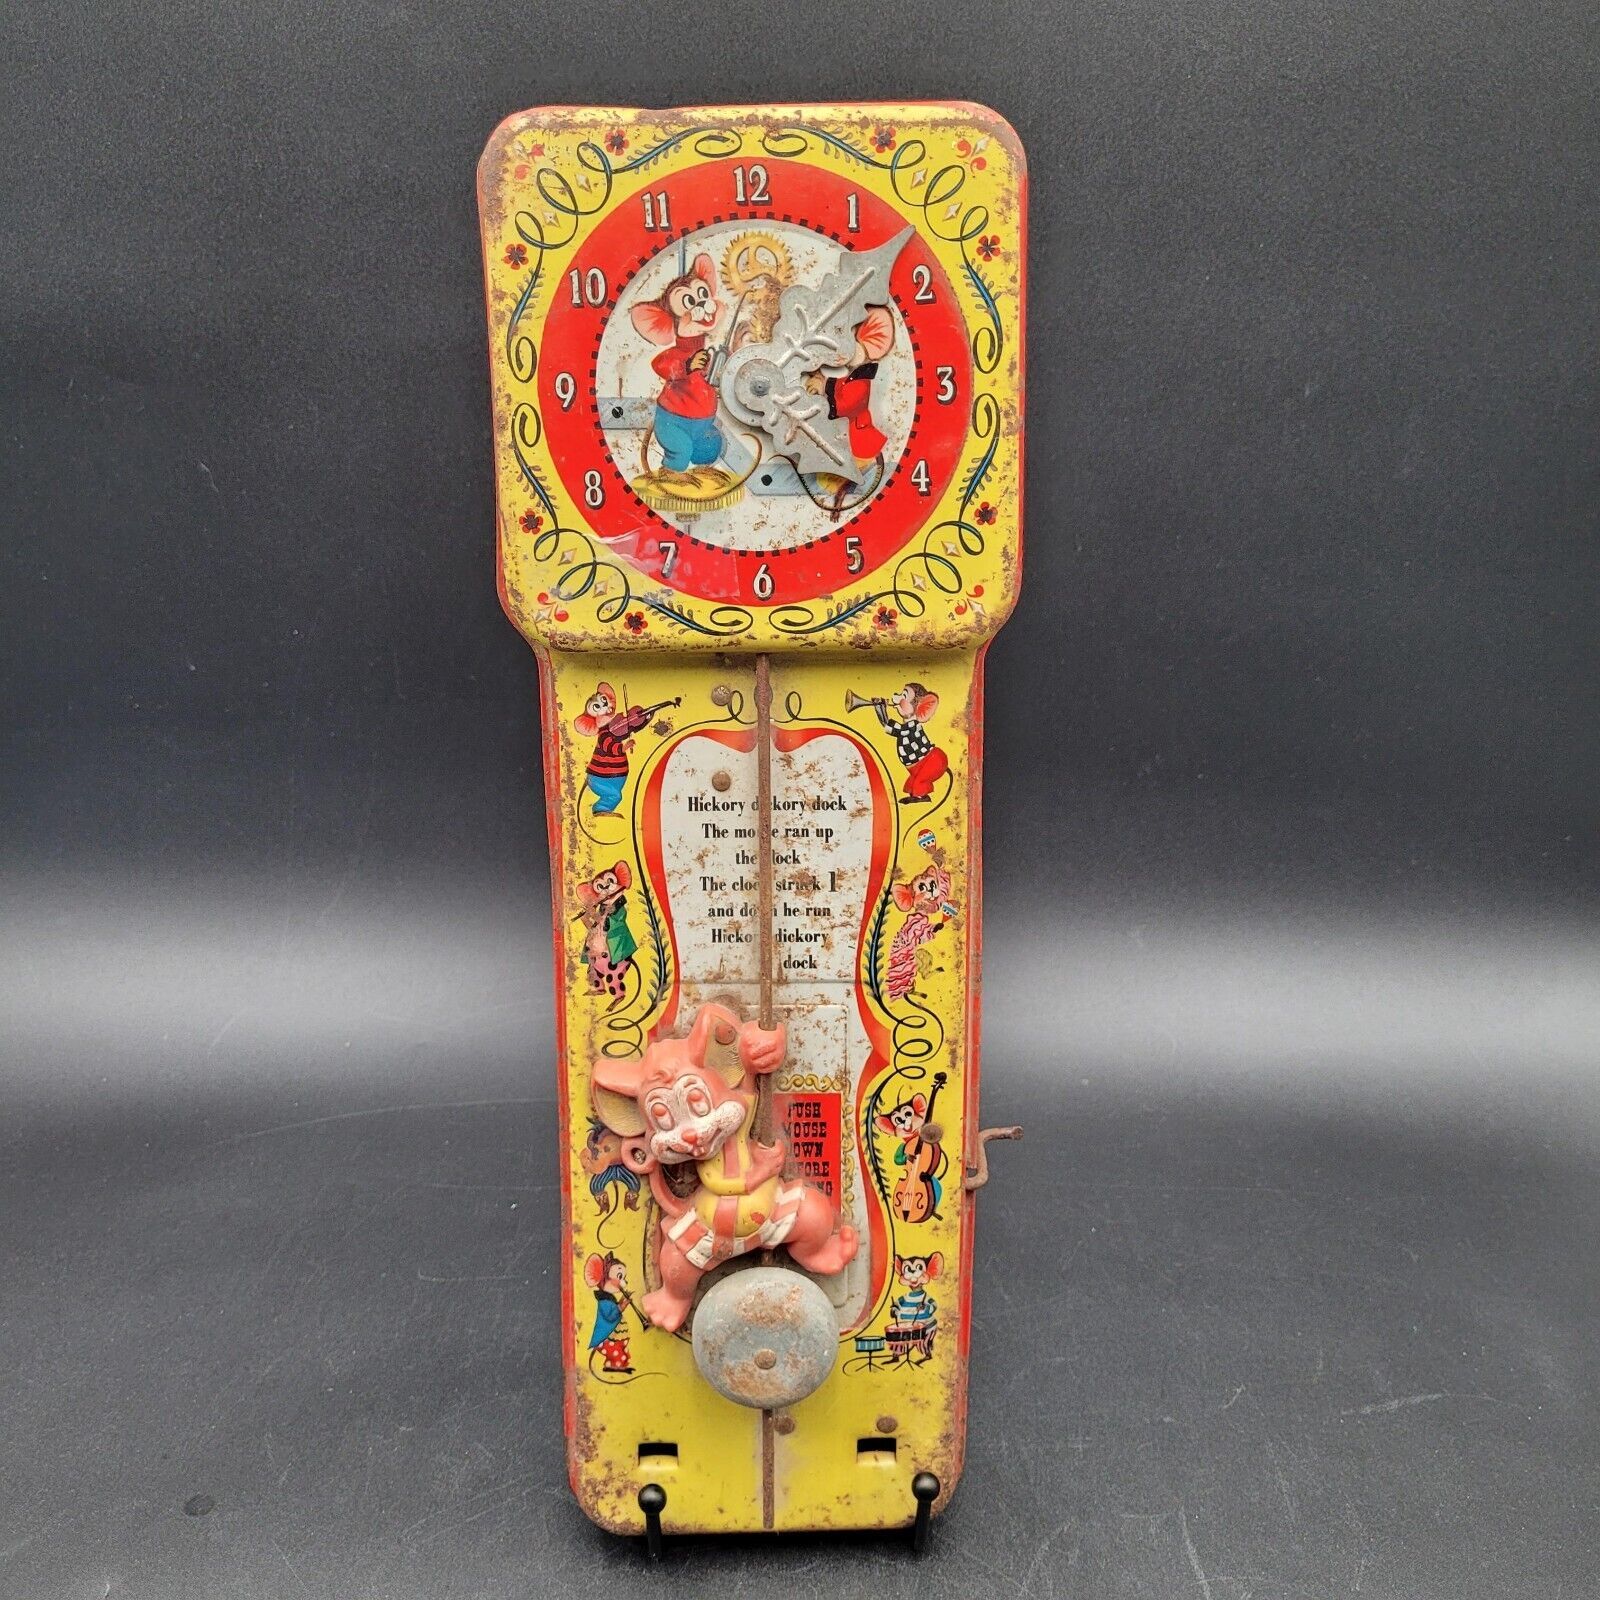 Vintage Mattel Tin Litho Wind-Up Toy ~HICKORY DICKORY DOCK~ Musical Parts Repair - $29.69